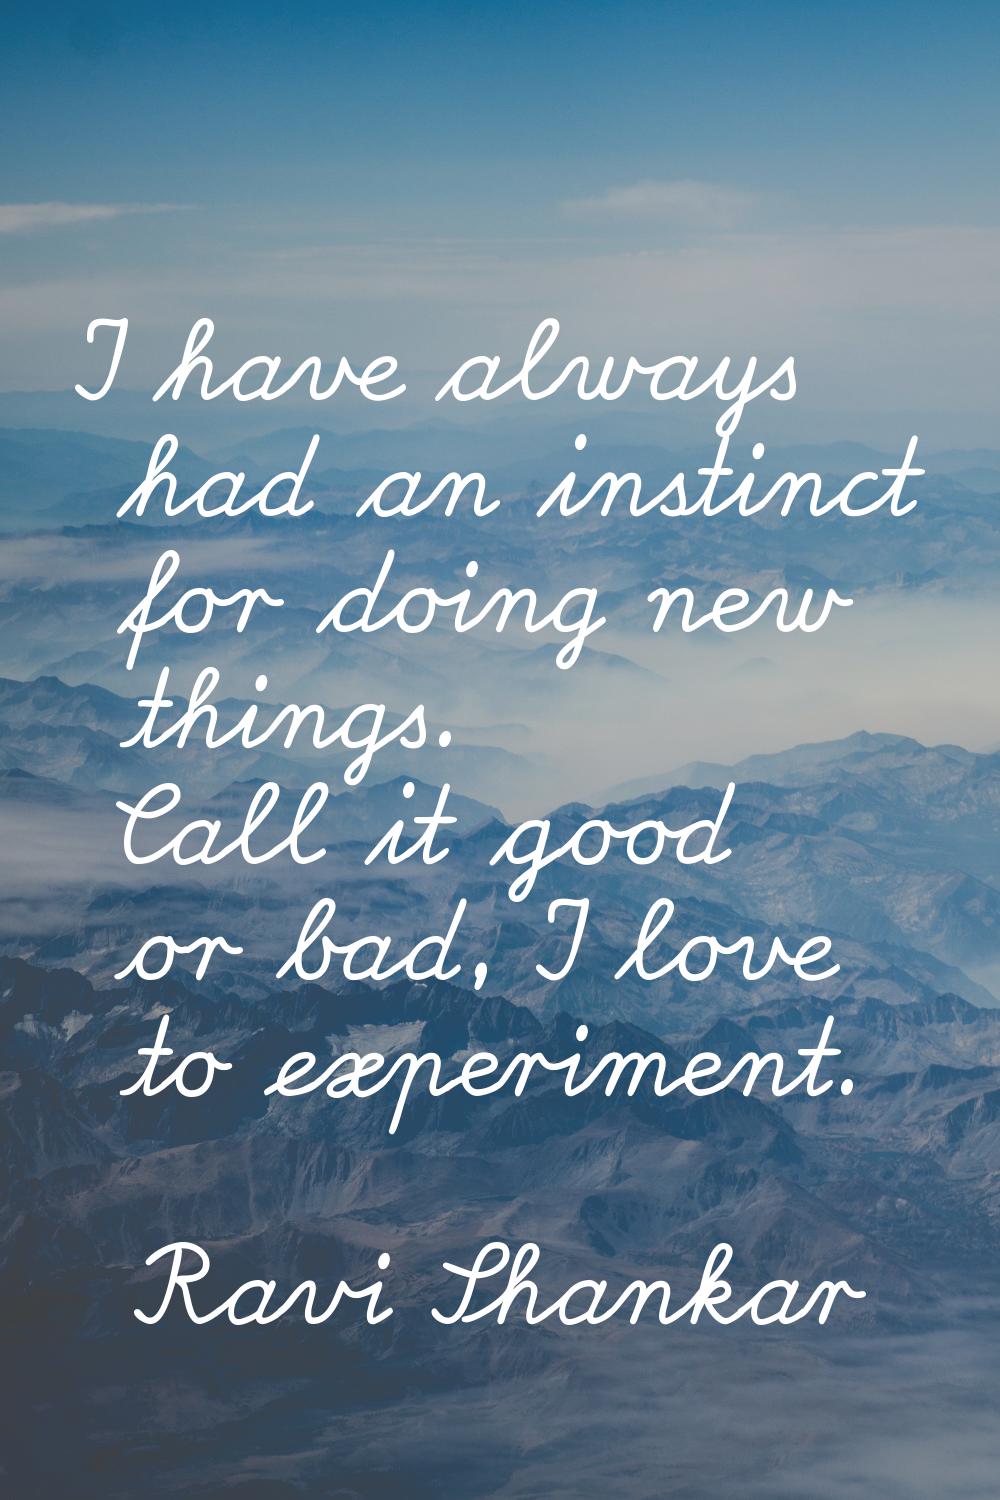 I have always had an instinct for doing new things. Call it good or bad, I love to experiment.